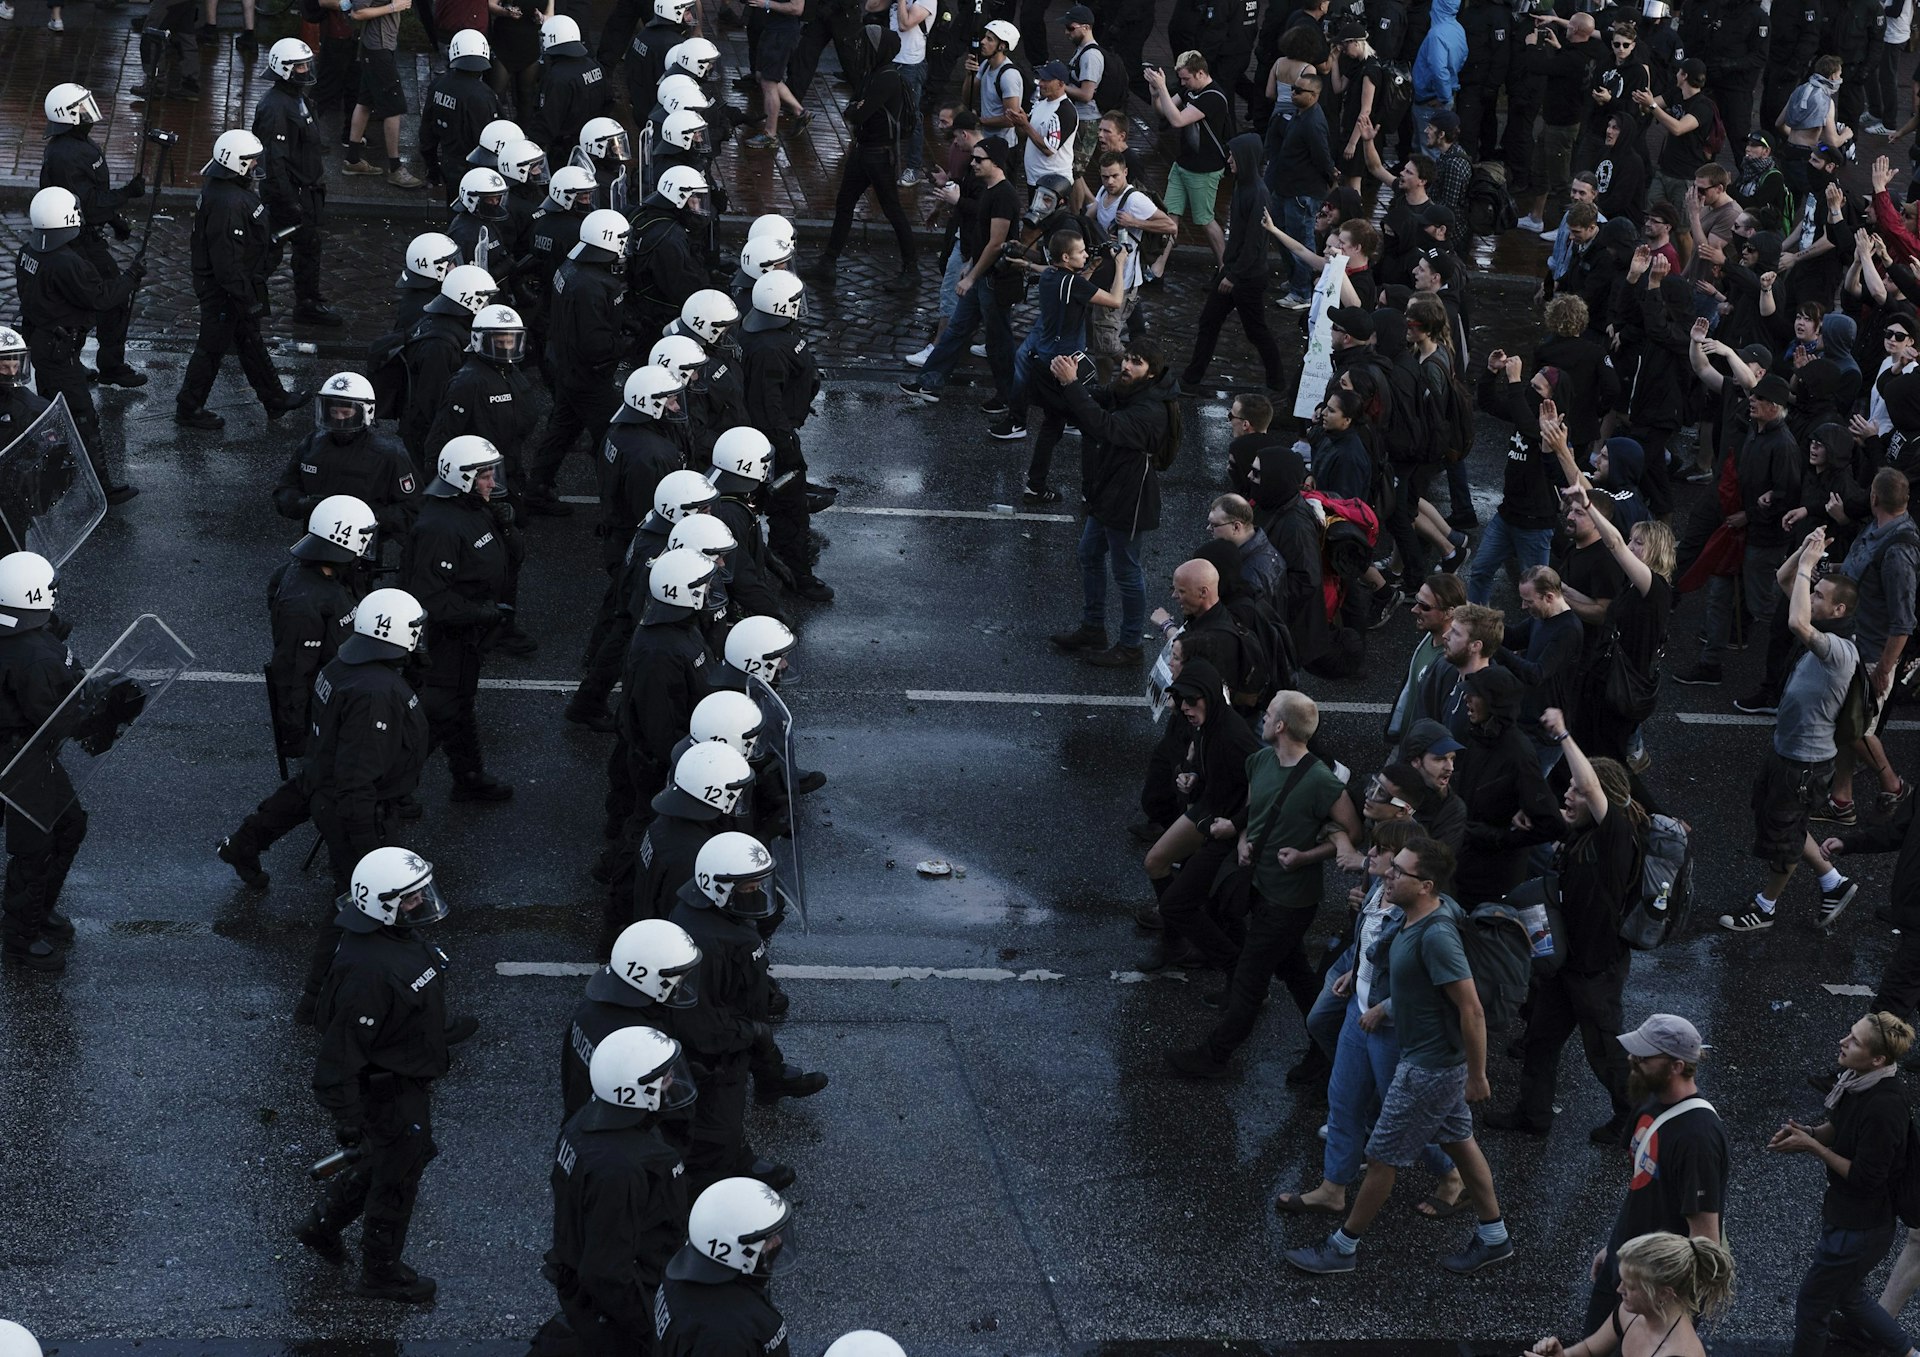 Why are the G20 protesters being portrayed as ‘militants’?